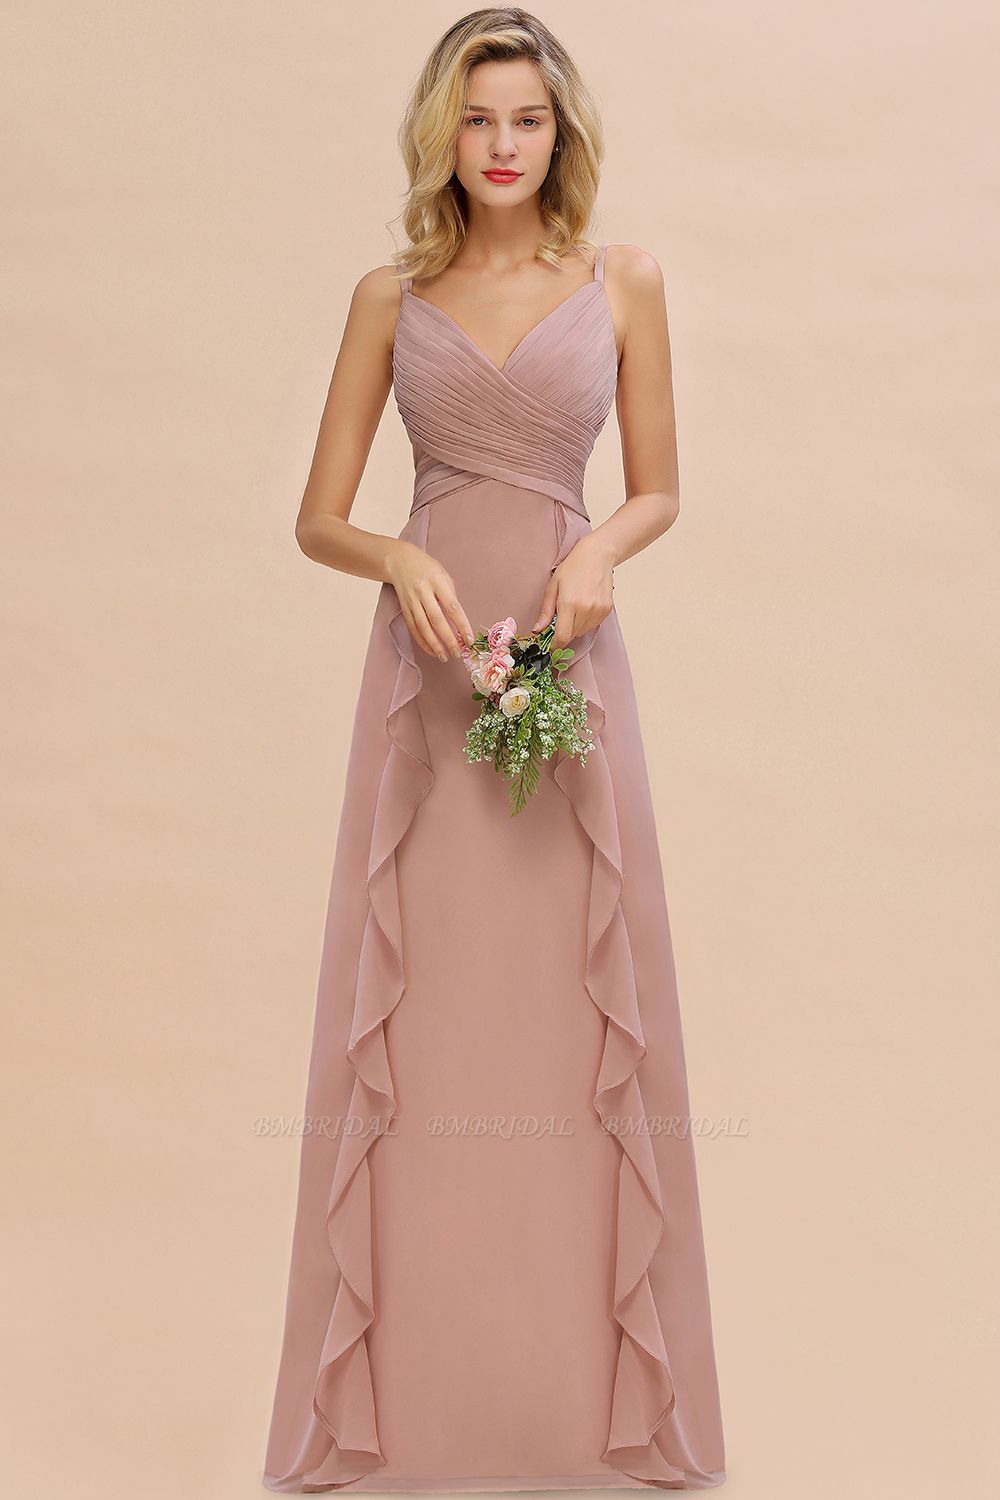 Three Tips For Choosing the Right Bridesmaid Dresses